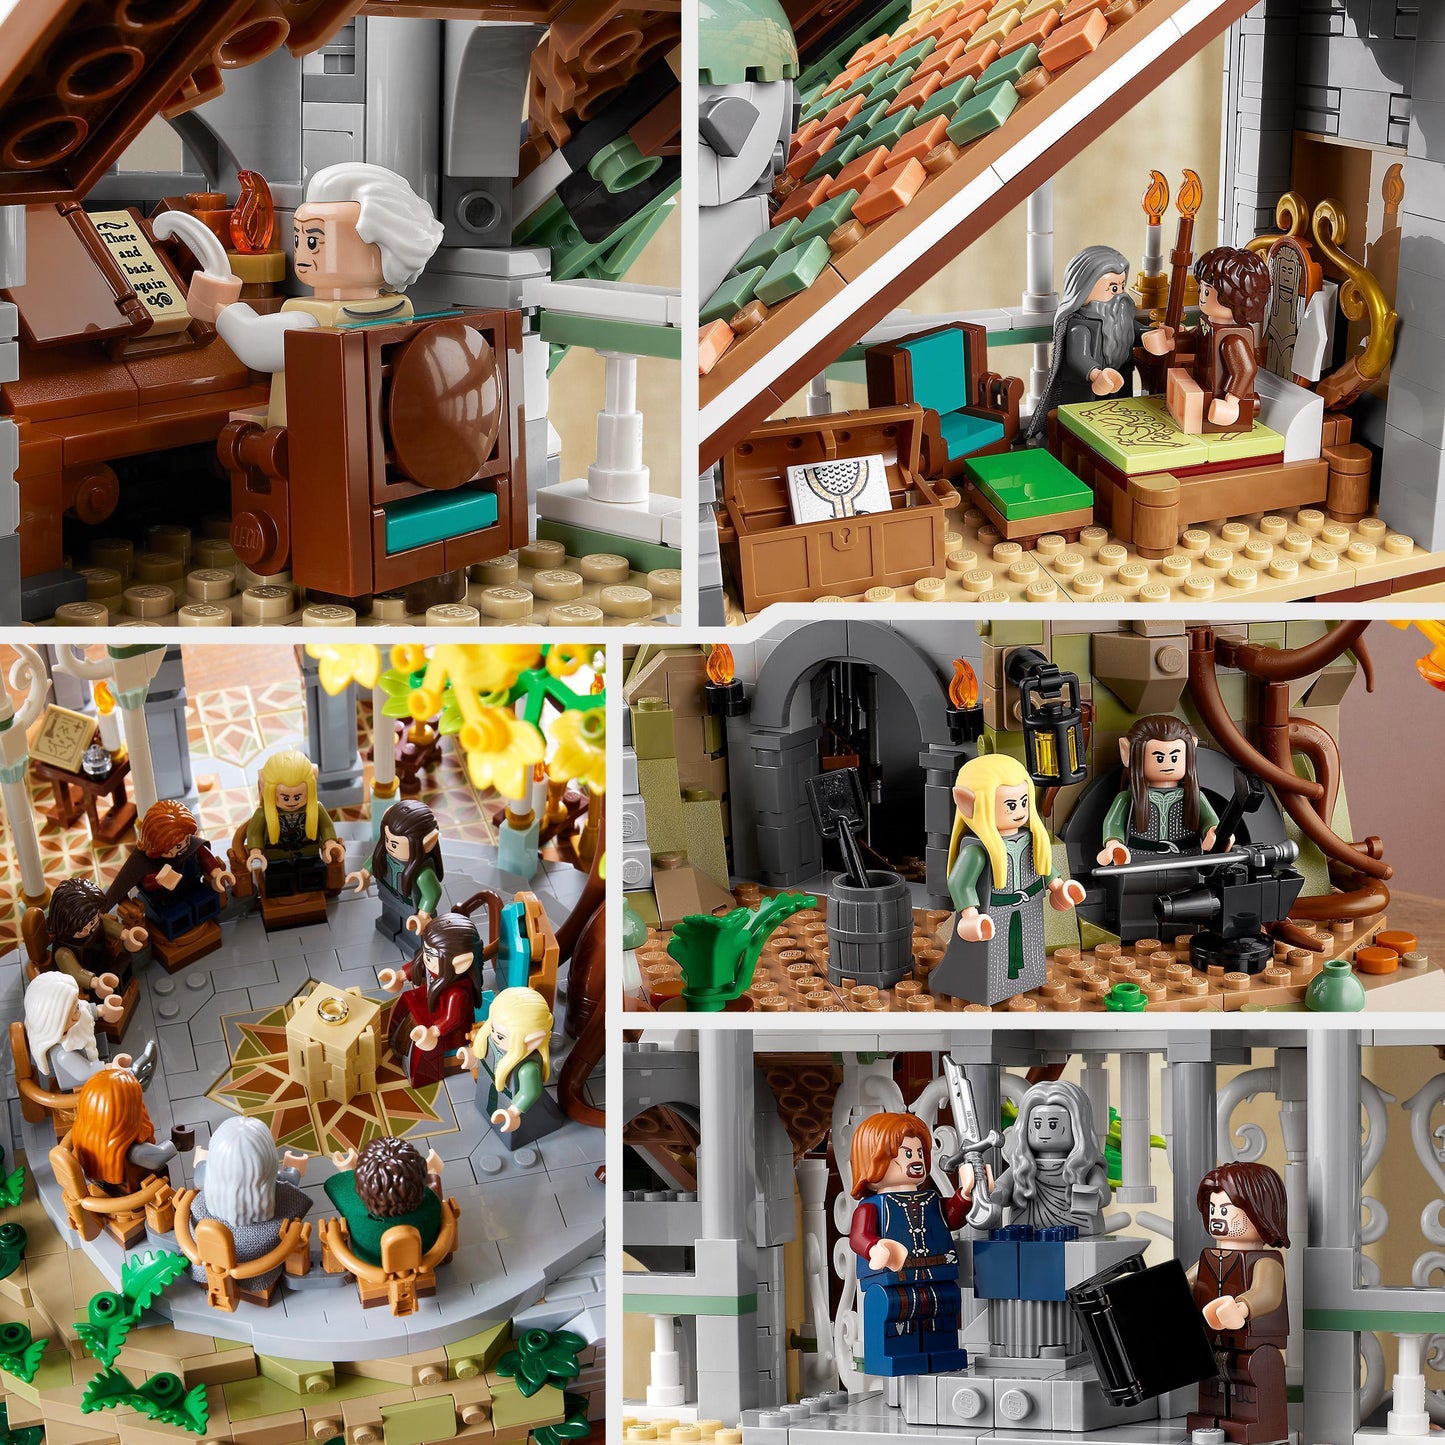 LEGO Rivendell™ 10316 The Lord Of The Rings LEGO LORD OF THE RINGS @ 2TTOYS LEGO €. 499.99